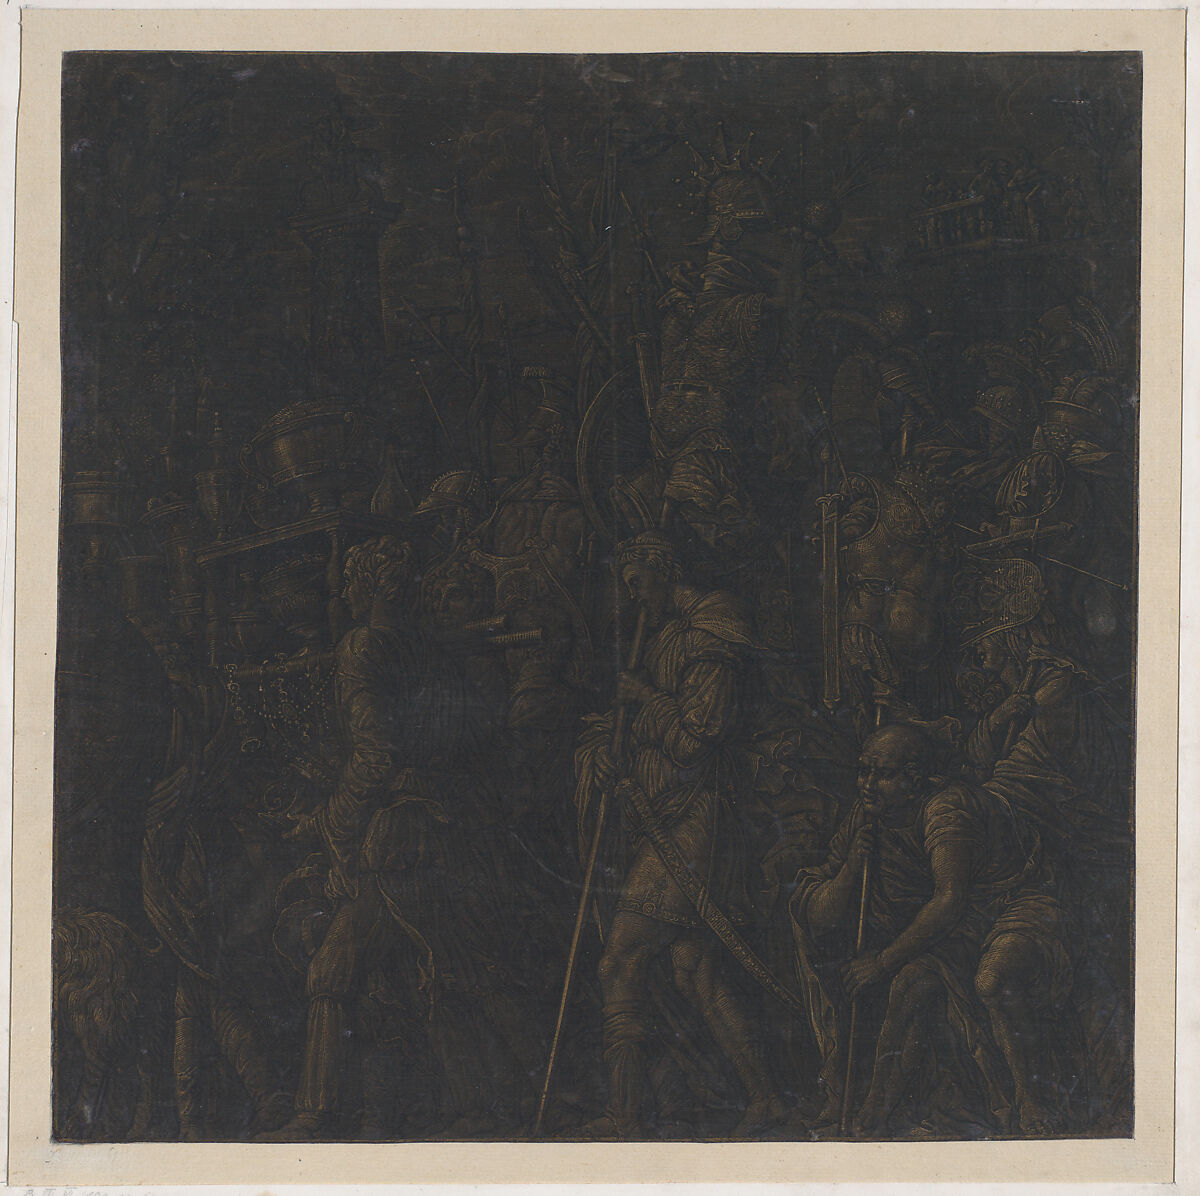 Sheet 8 from The Triumphs of Caesar, after Mantegna, Andrea Andreani (Italian, Mantua 1558/1559–1629), Woodcut, printed on blue/black silk with gold highlights applied by hand probably by Andreani himself 